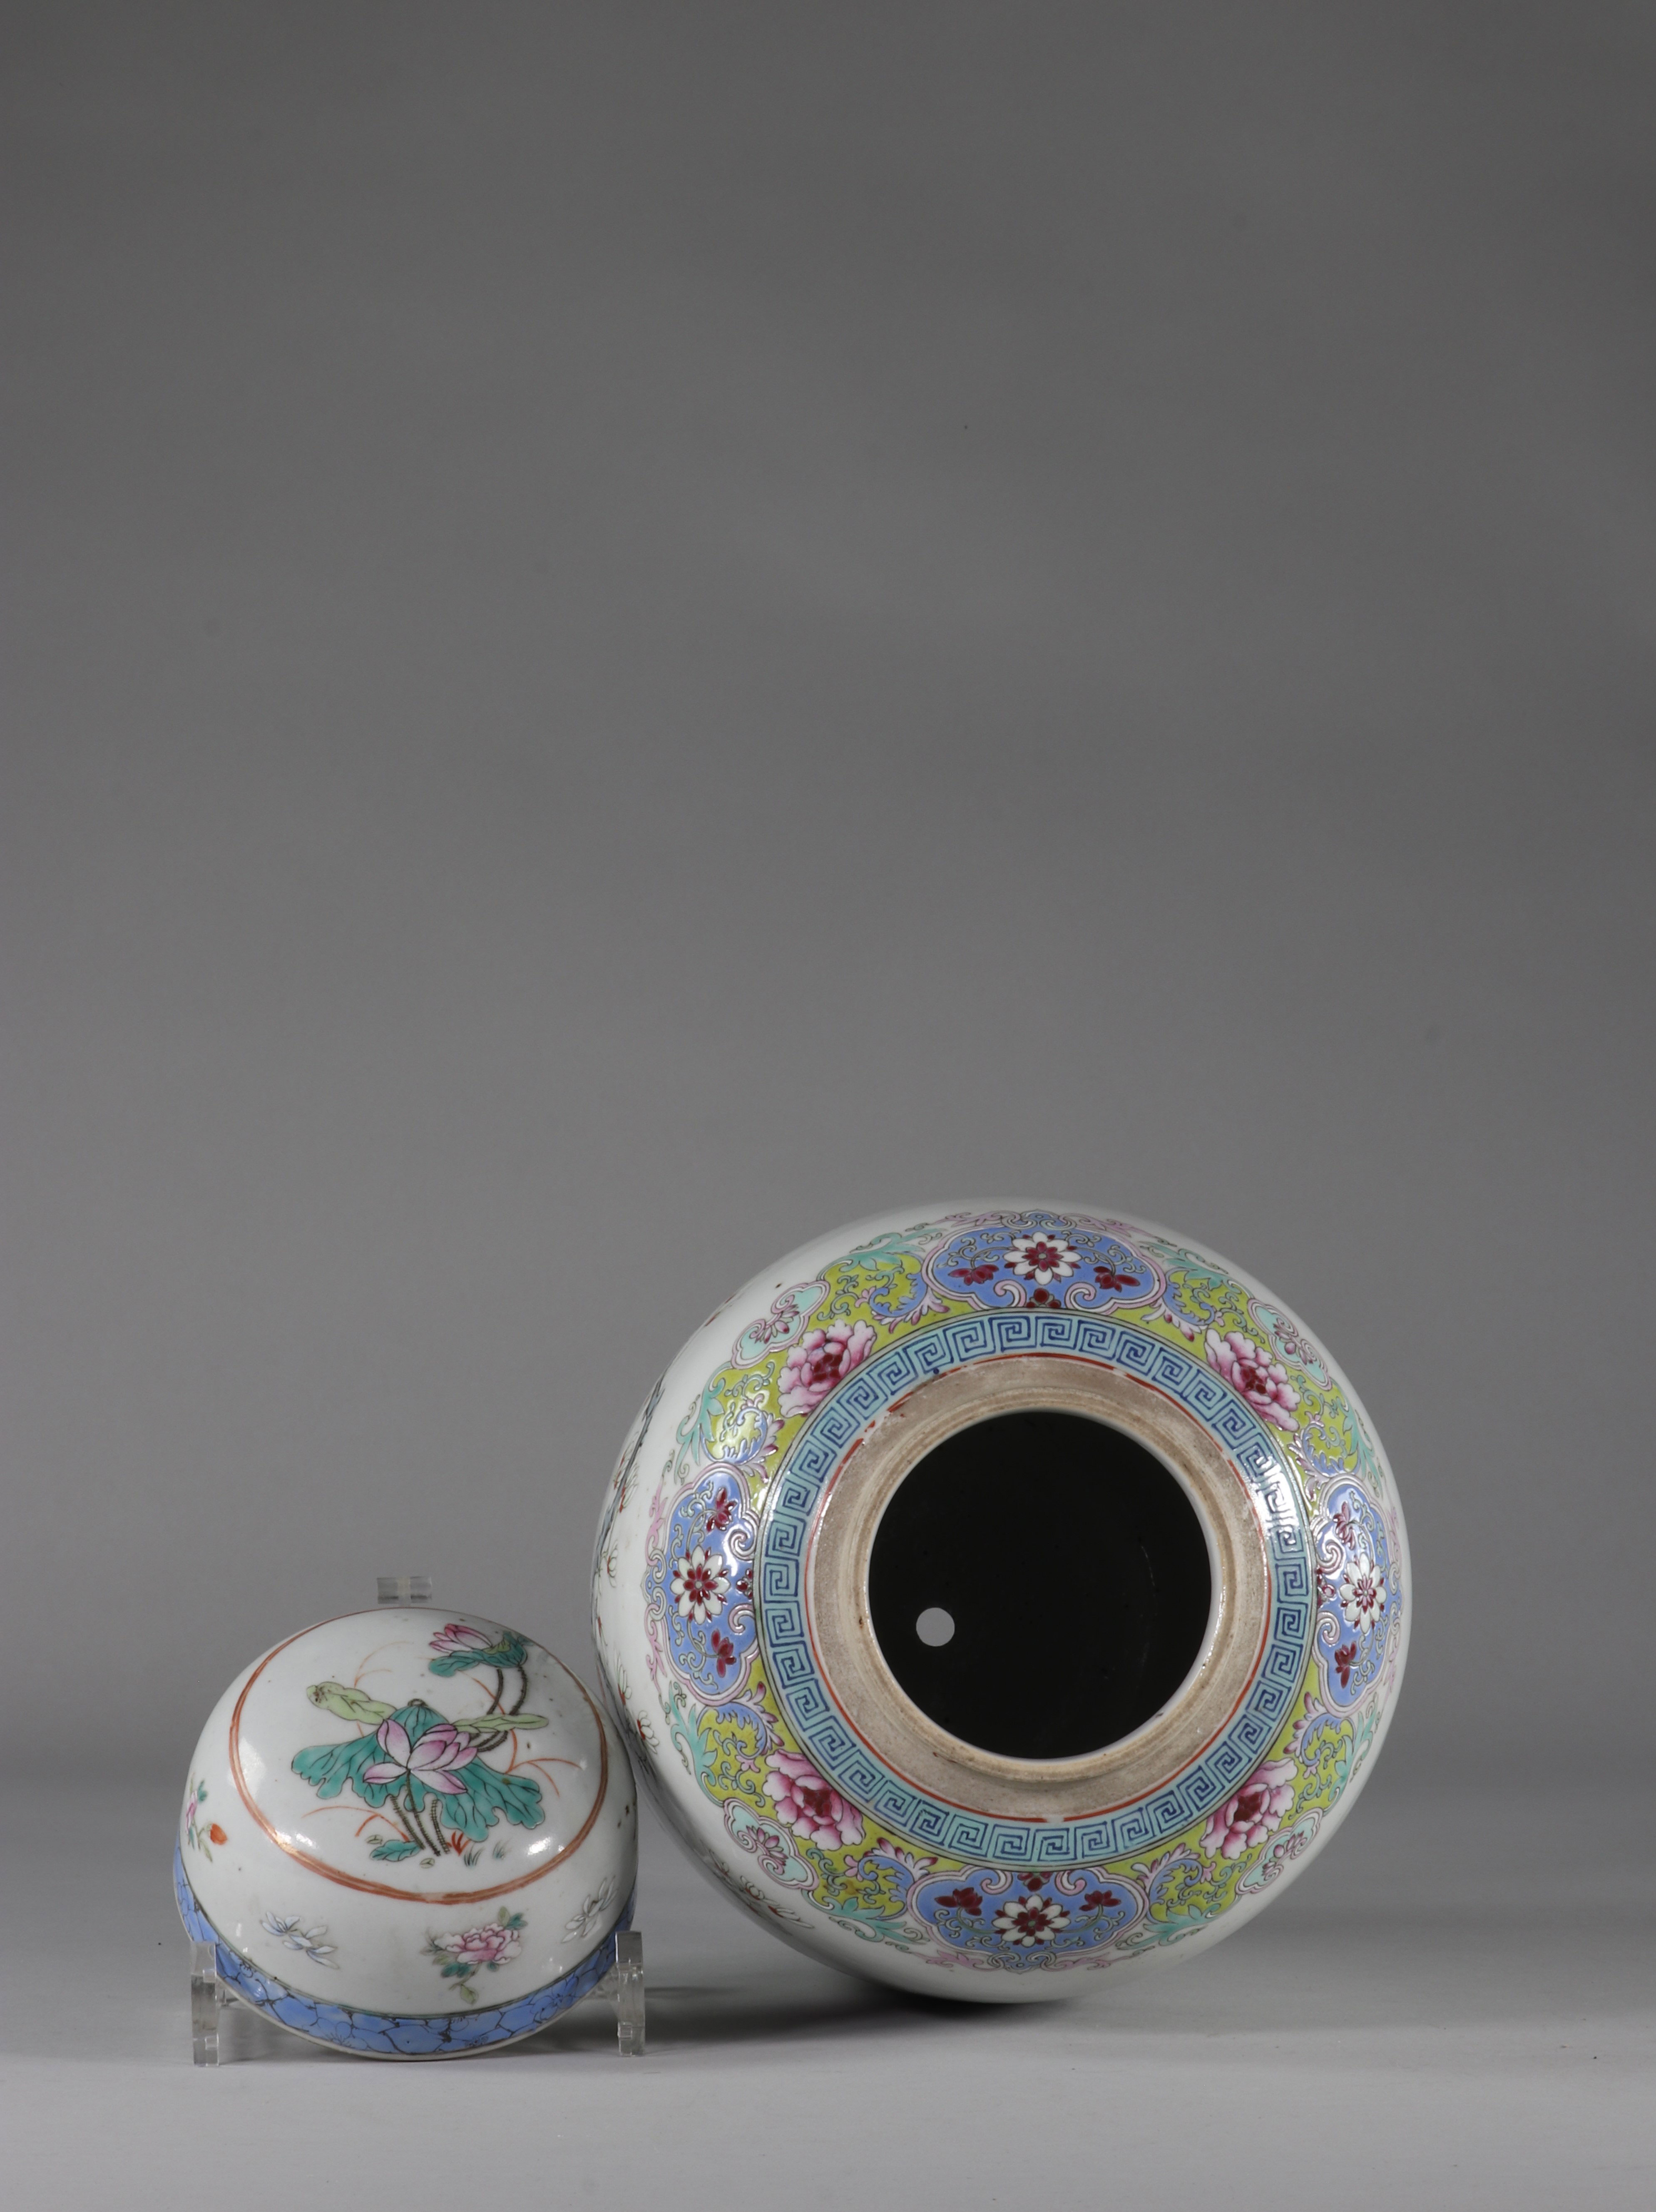 China famille rose porcelain vase decorated with birds and flowers Qing period - Image 6 of 7